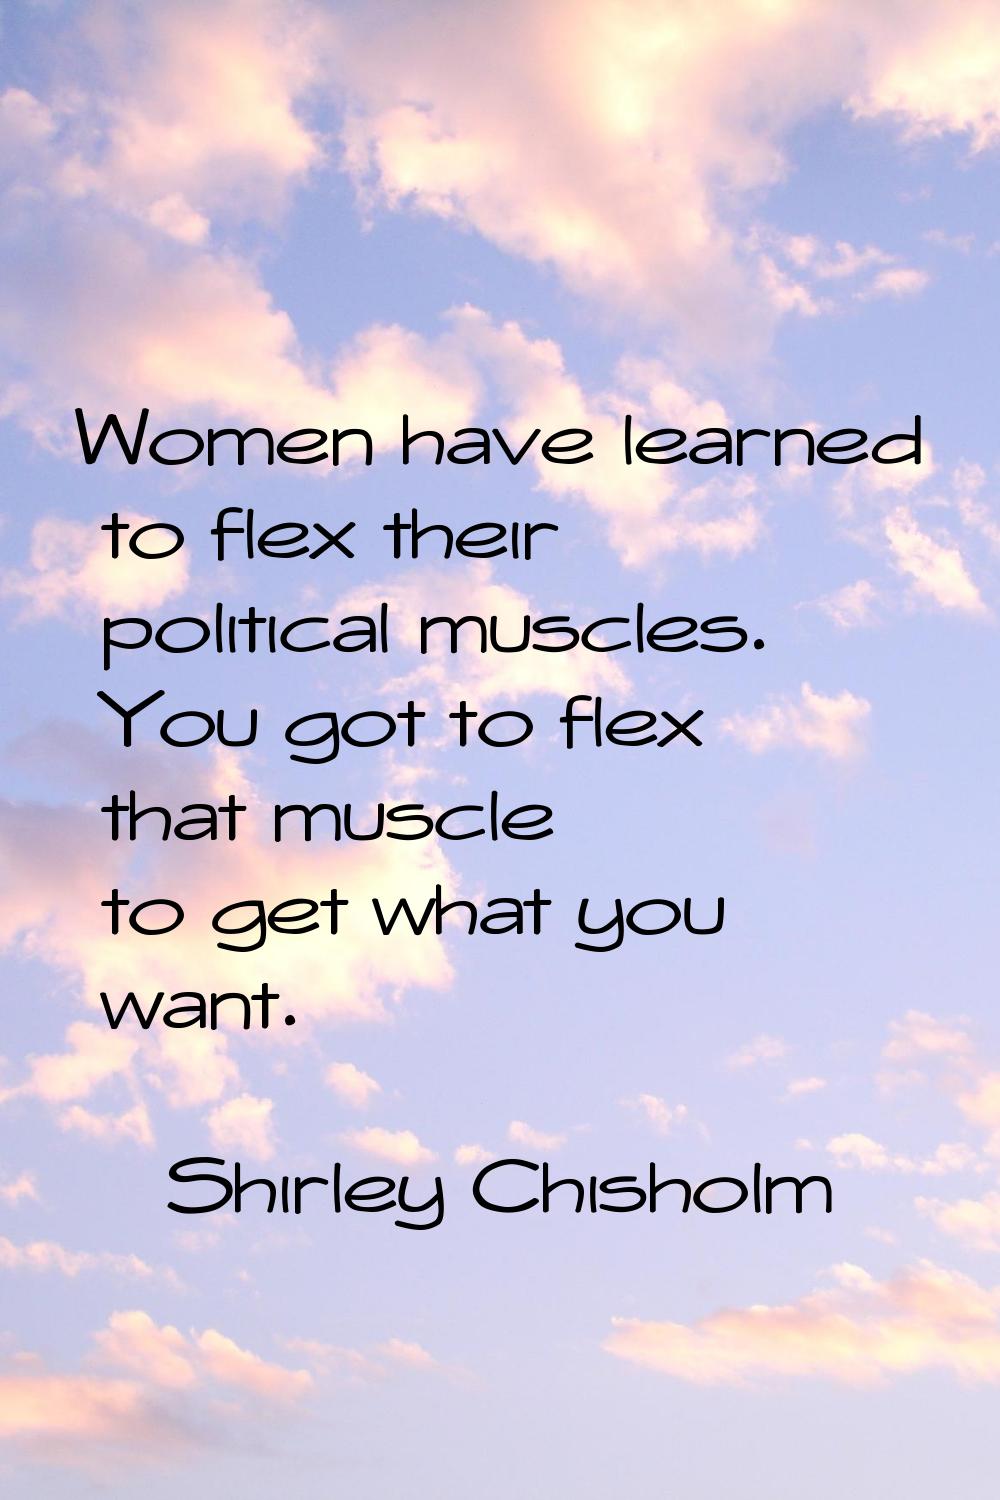 Women have learned to flex their political muscles. You got to flex that muscle to get what you wan